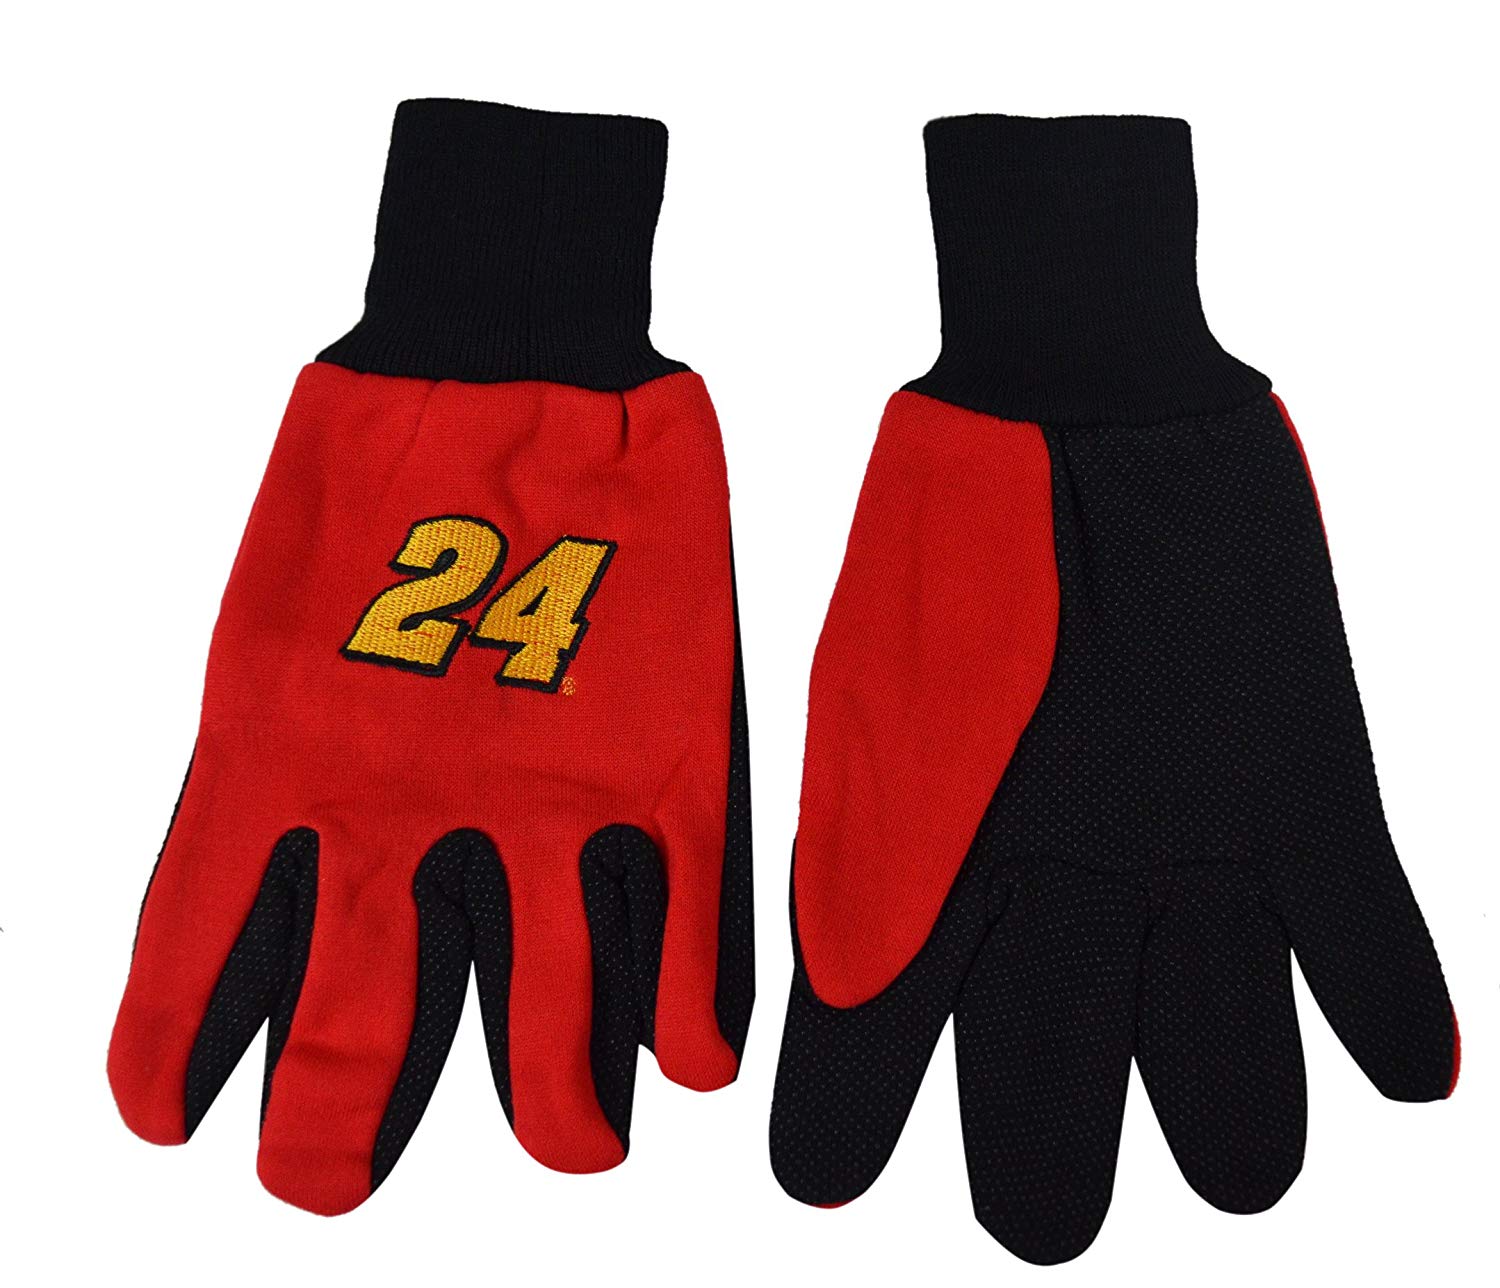 Official NASCAR Fan Shop Authentic 2-Pack Utility Work Glove Set. Show Pride for your favorite NASCAR driver while working on your vehicle at home or work